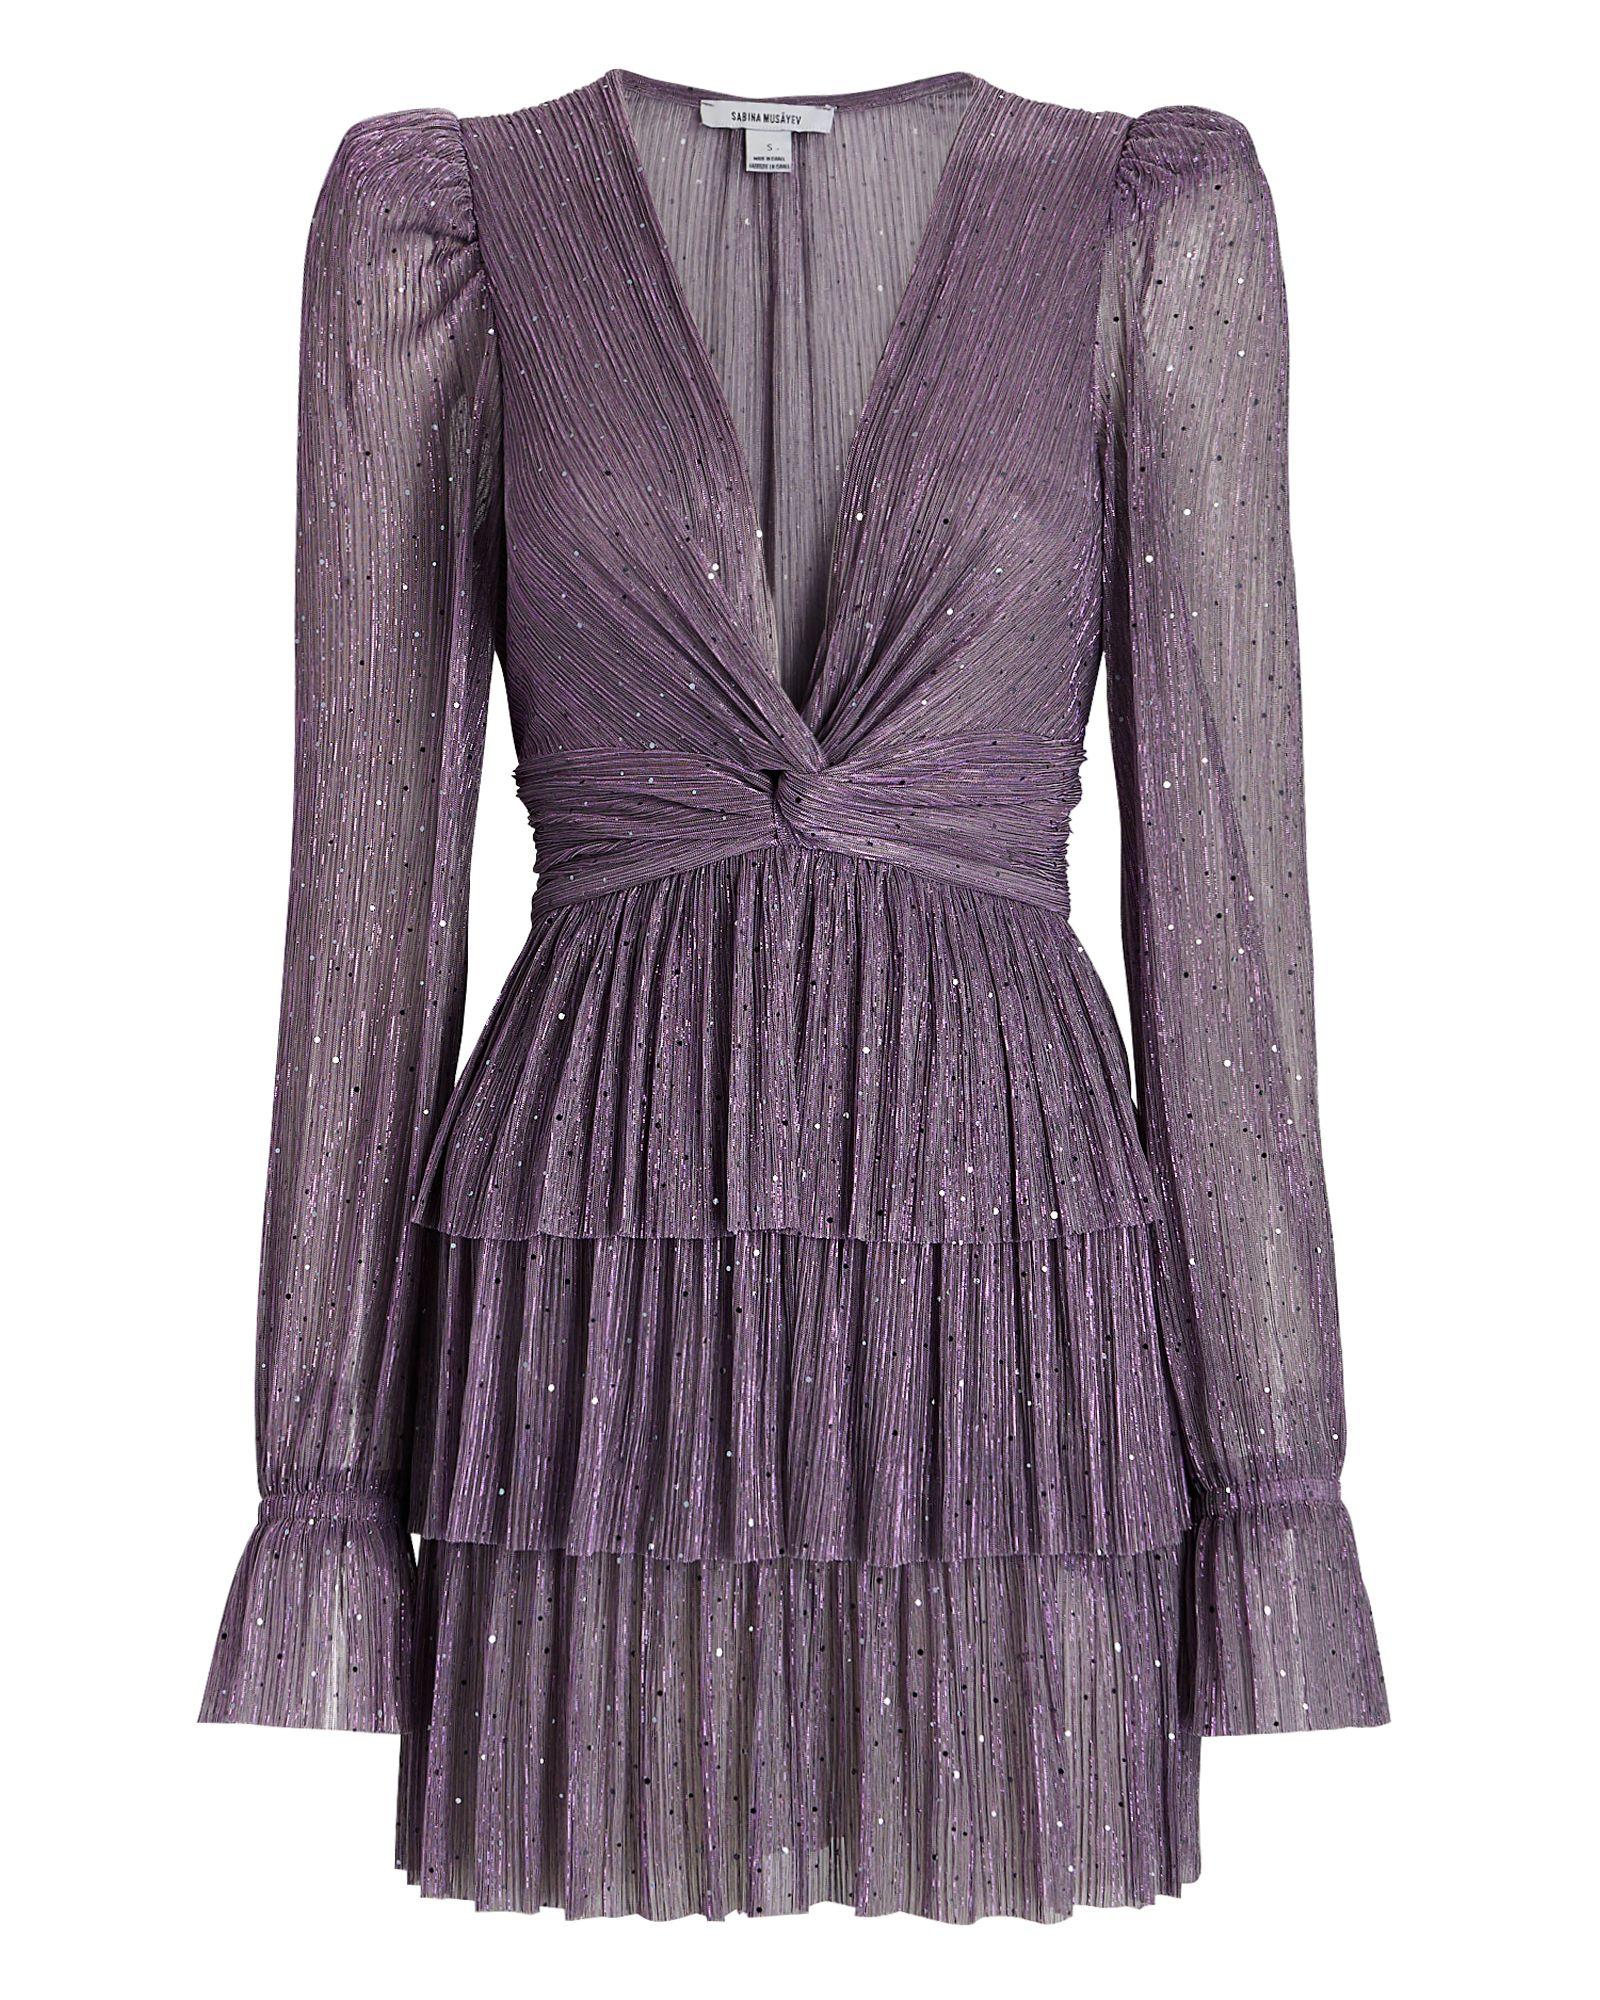 Sabina Musayev Felicie Tiered Sequined Knit Mini Dress in Purple | Lyst ...